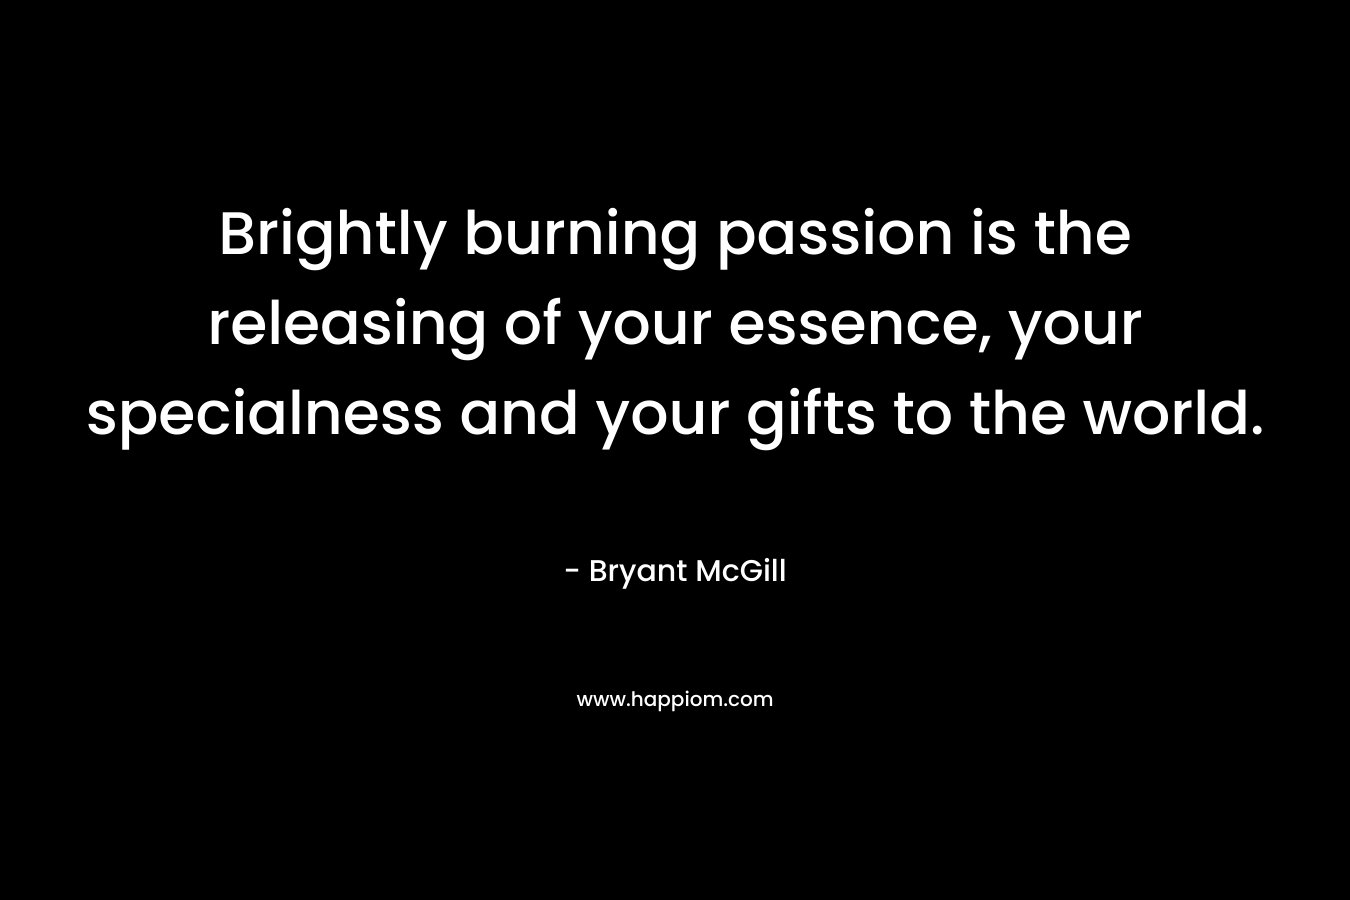 Brightly burning passion is the releasing of your essence, your specialness and your gifts to the world.